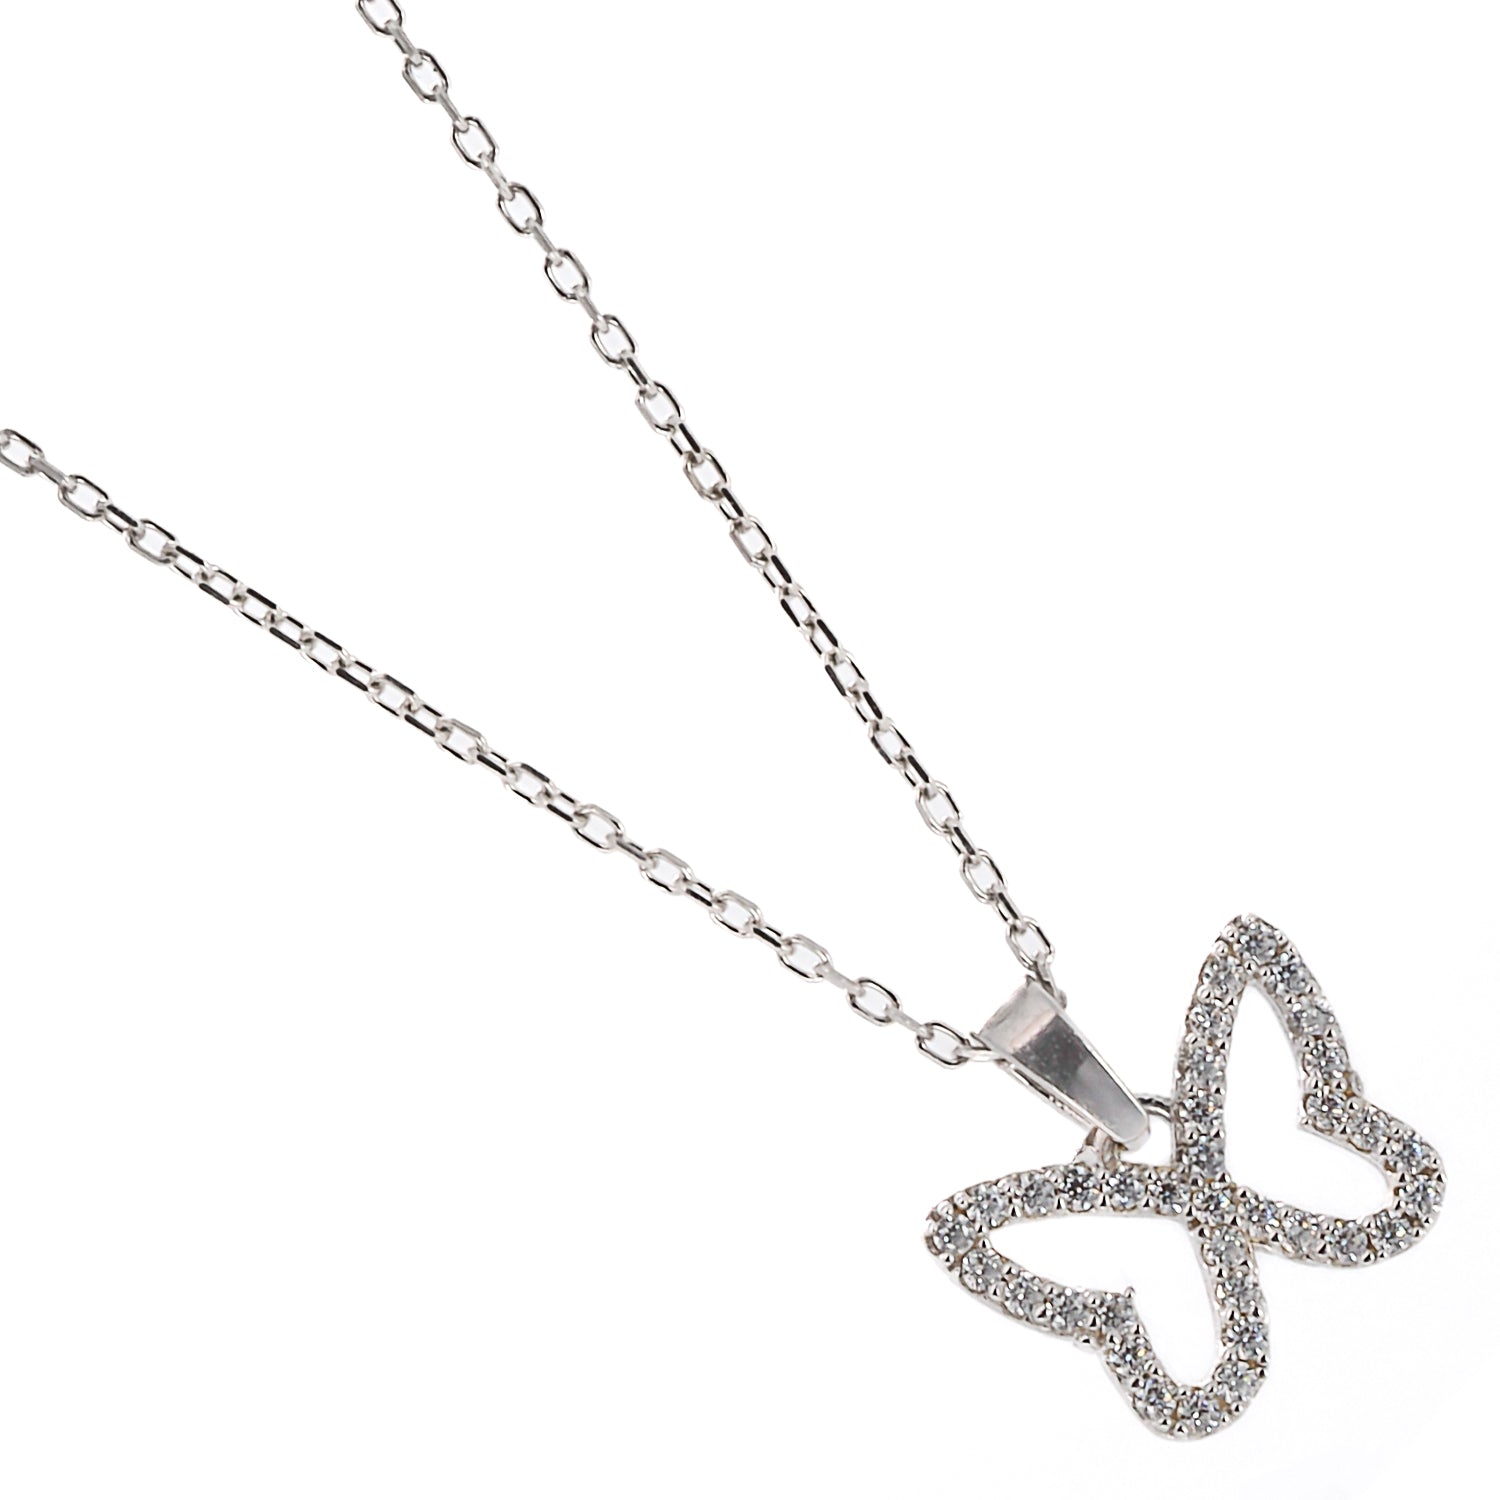 The elegant 925 Sterling silver chain of the Silver Sparkly Butterfly Necklace.